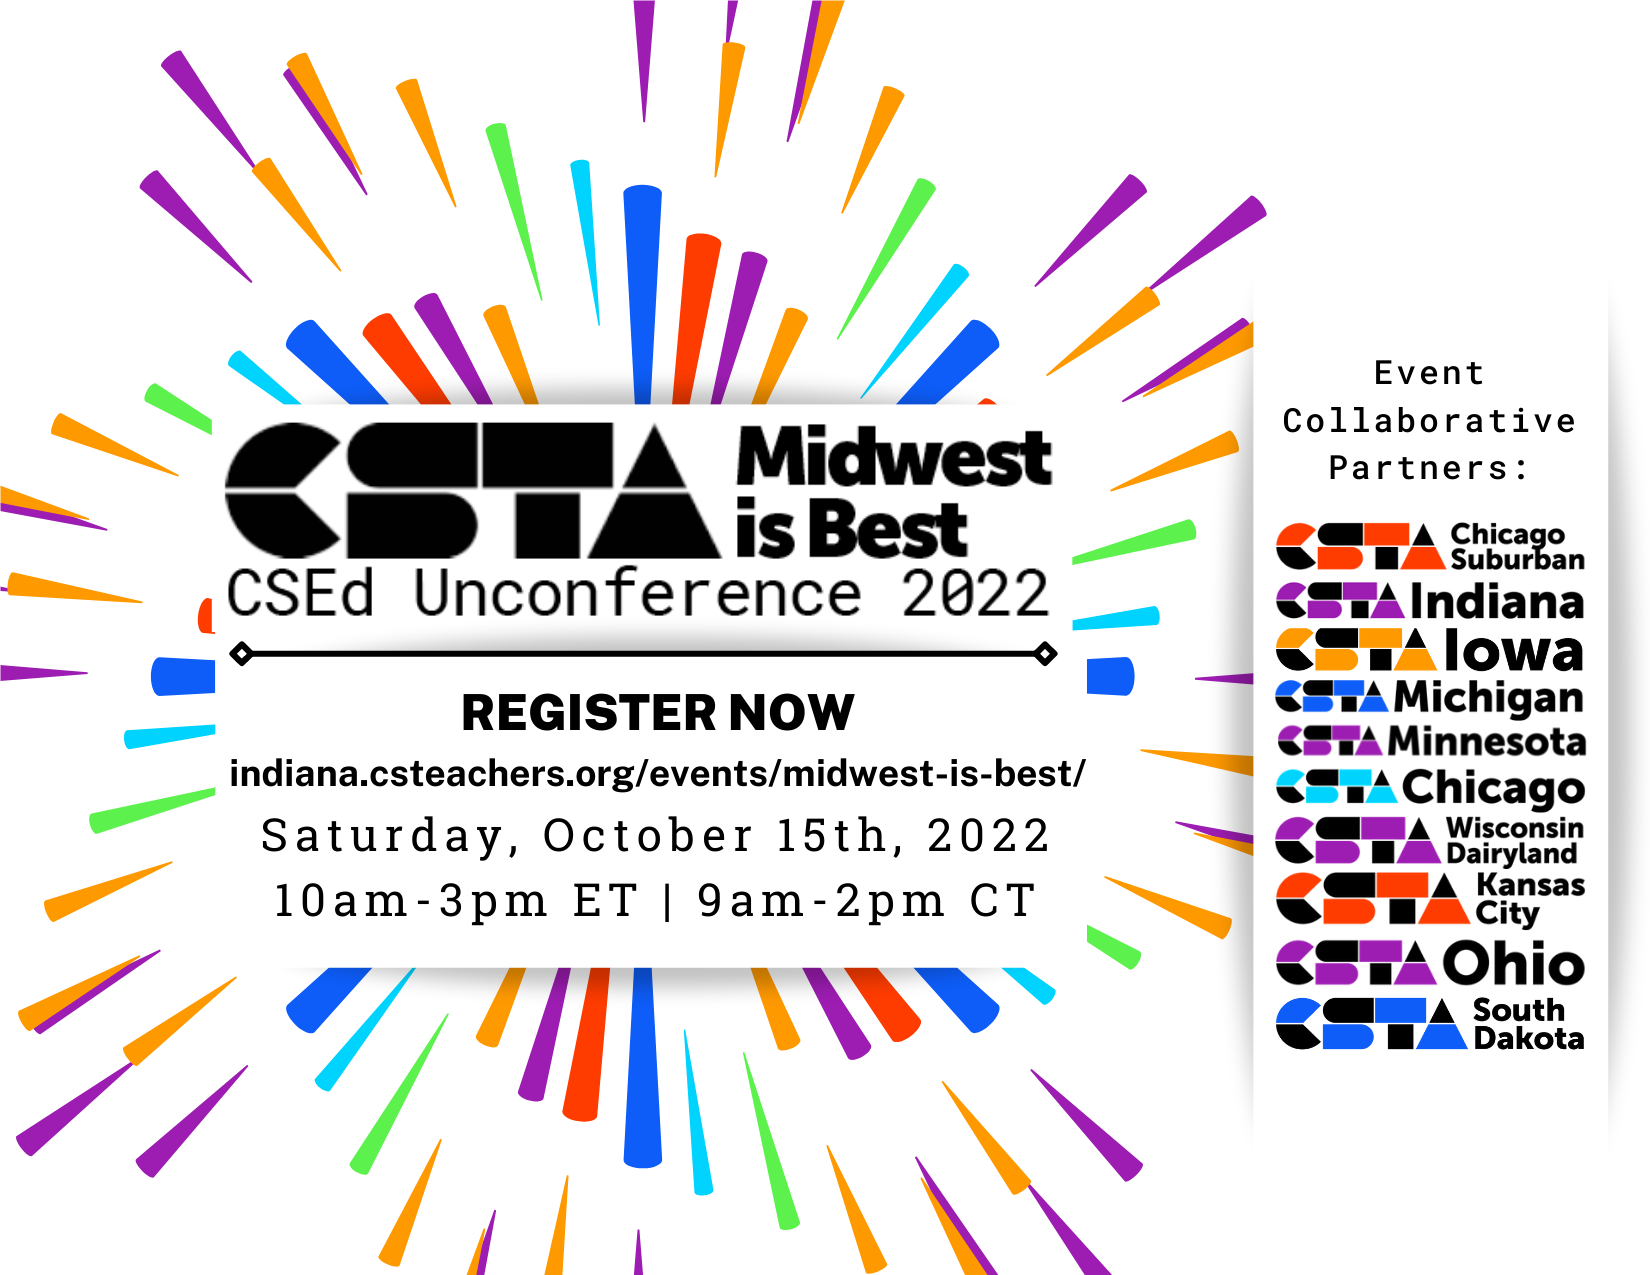 Midwest is Best CS Ed Unconference